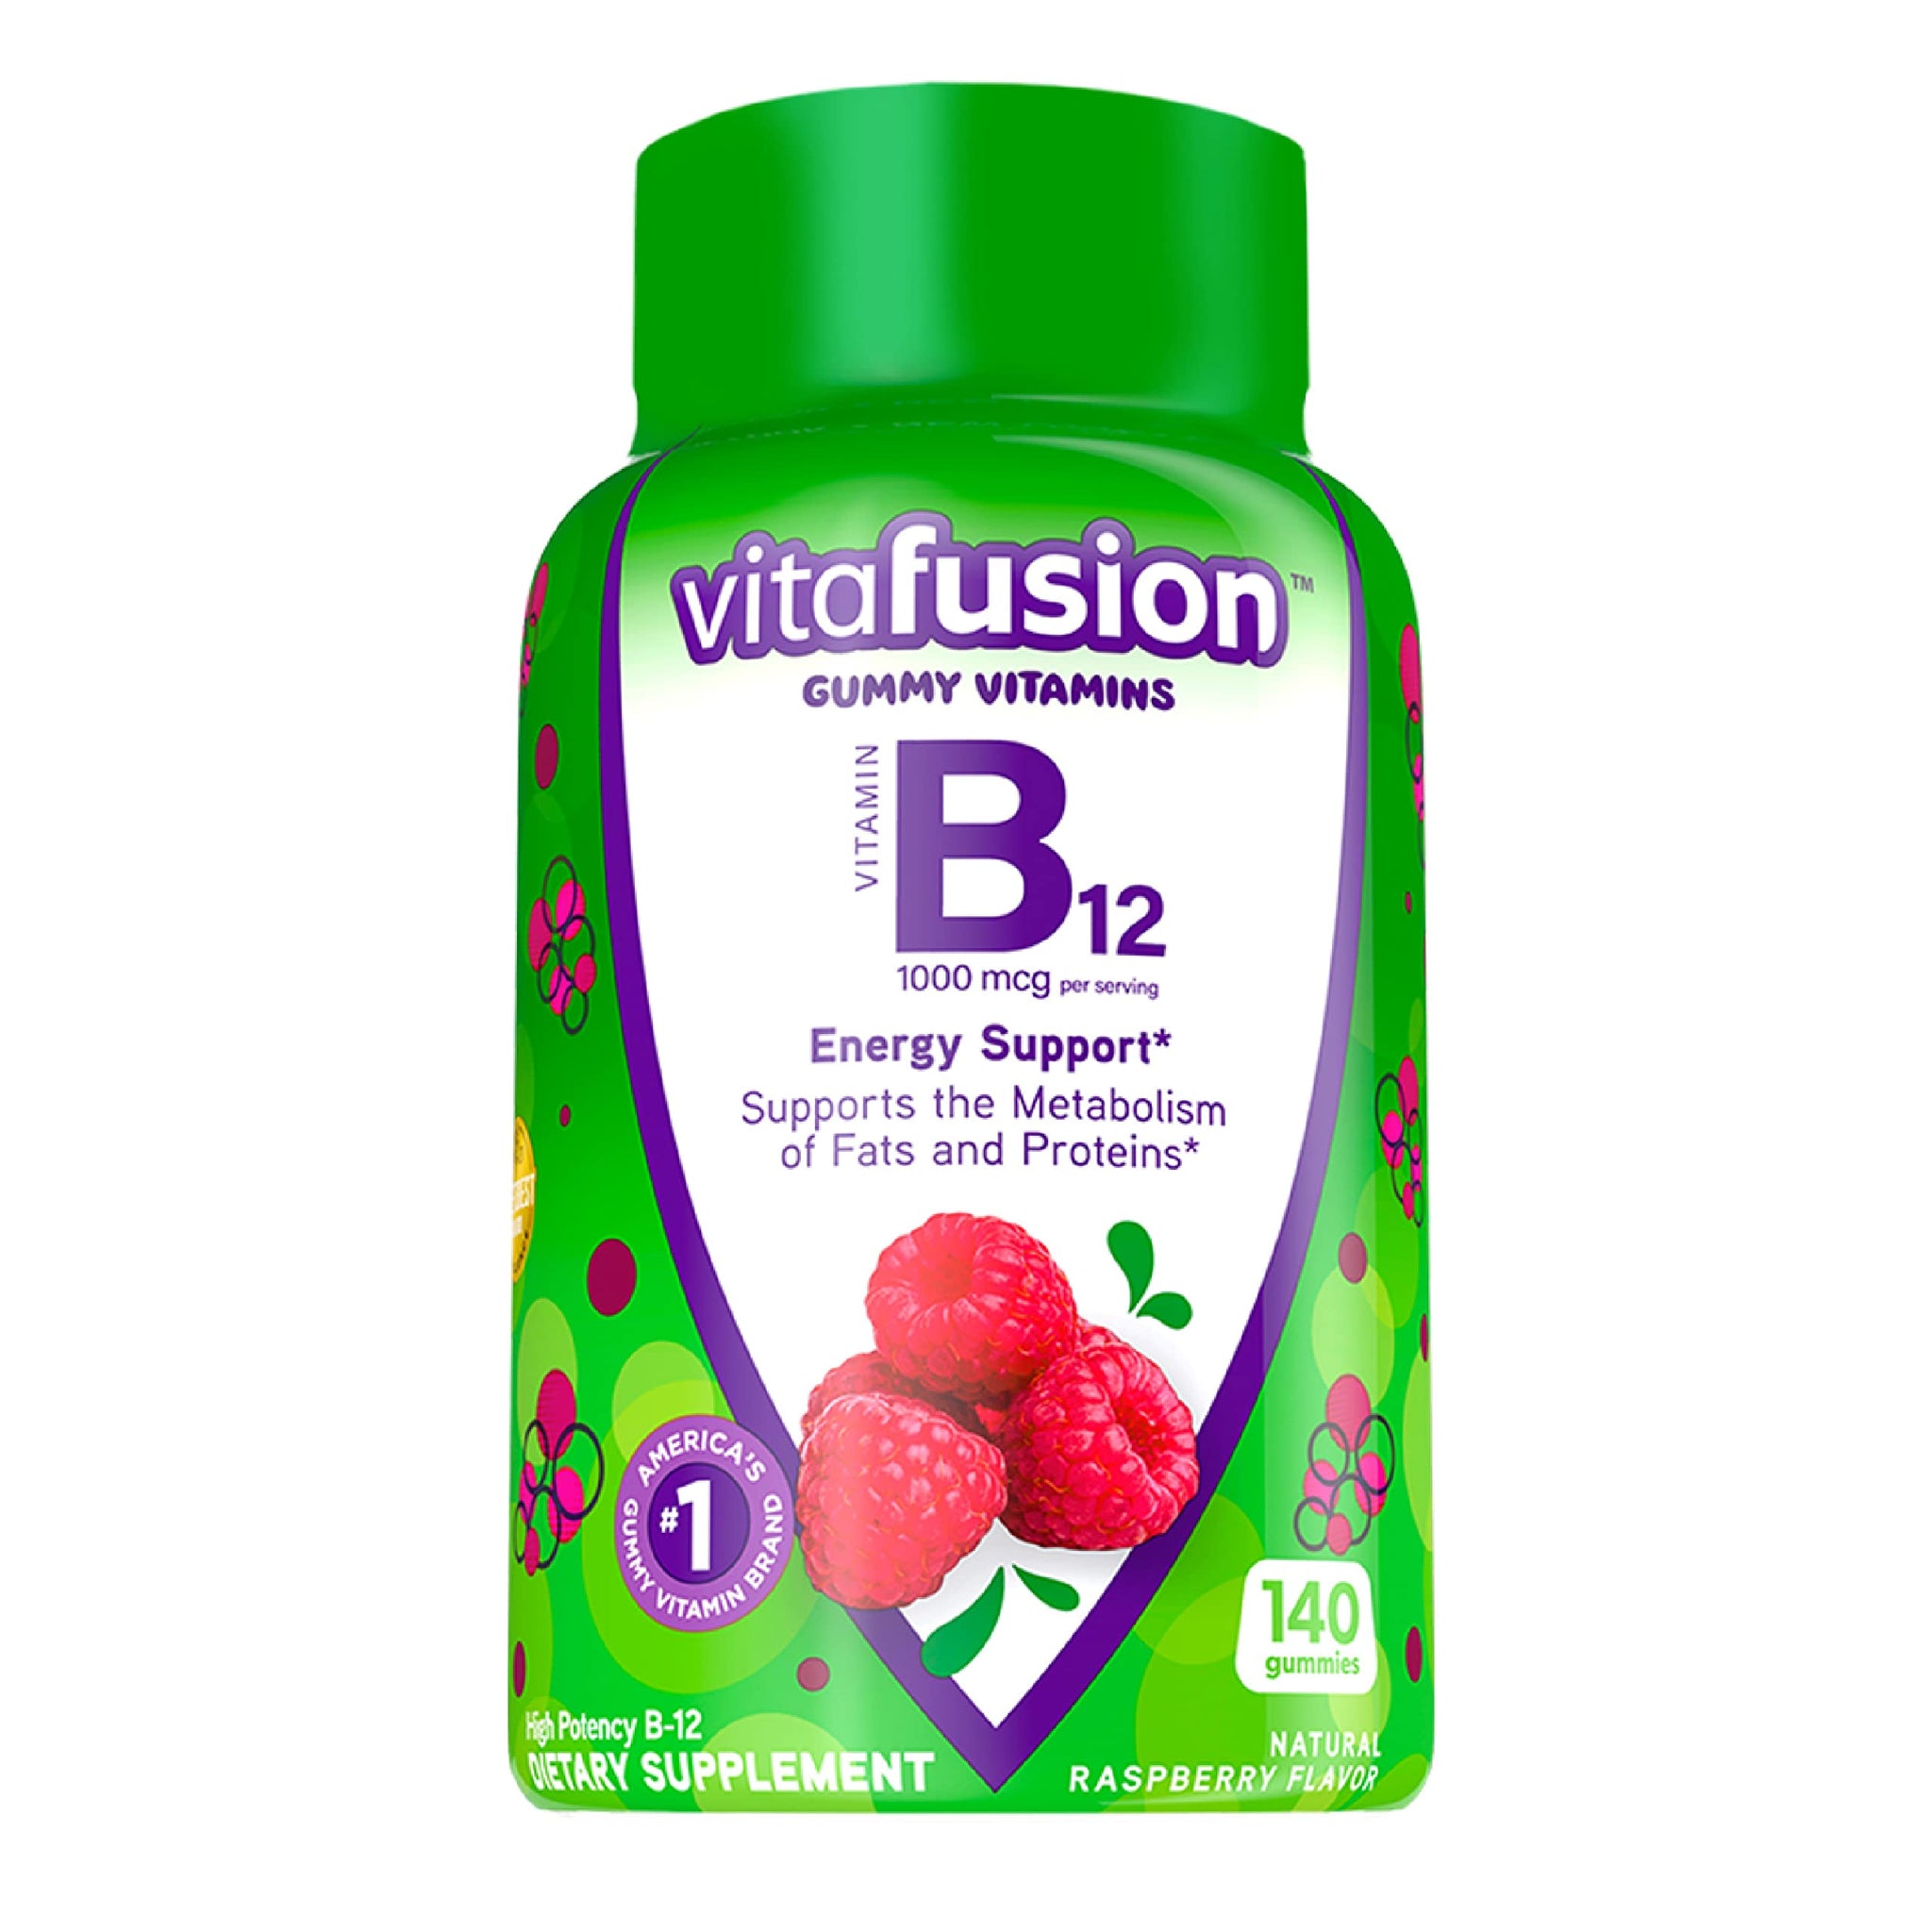 vitafusion Vitamin B12 Gummy Vitamins for Energy Metabolism Support, Raspberry Flavored, America’s Number 1 Gummy Vitamin Brand, 70 Day Supply, 140 Count